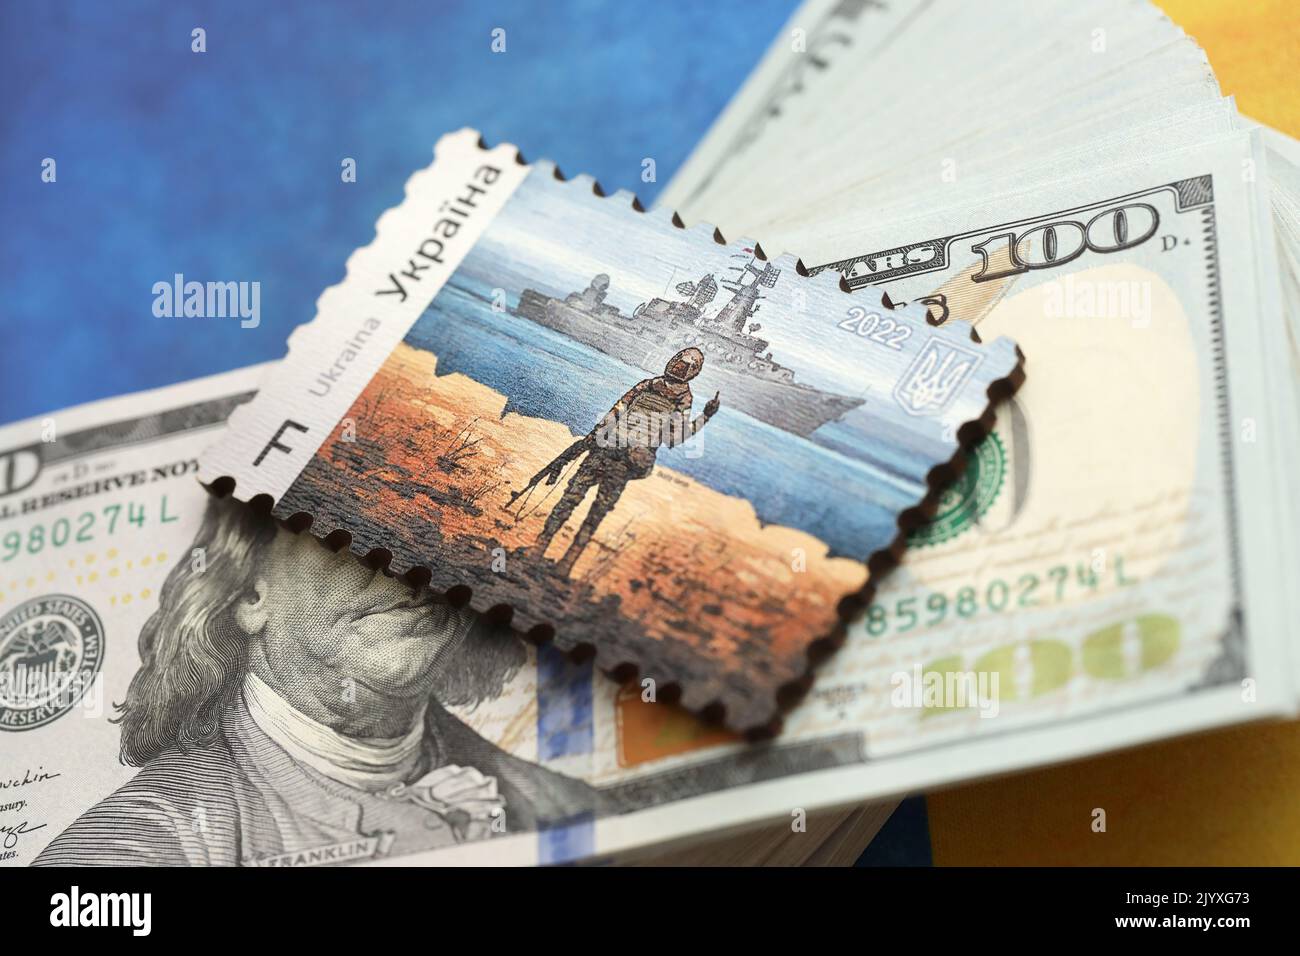 TERNOPIL, UKRAINE - SEPTEMBER 2, 2022 Famous Ukrainian postmark with russian warship and ukrainian soldier as wooden souvenir on huge amount of US dol Stock Photo